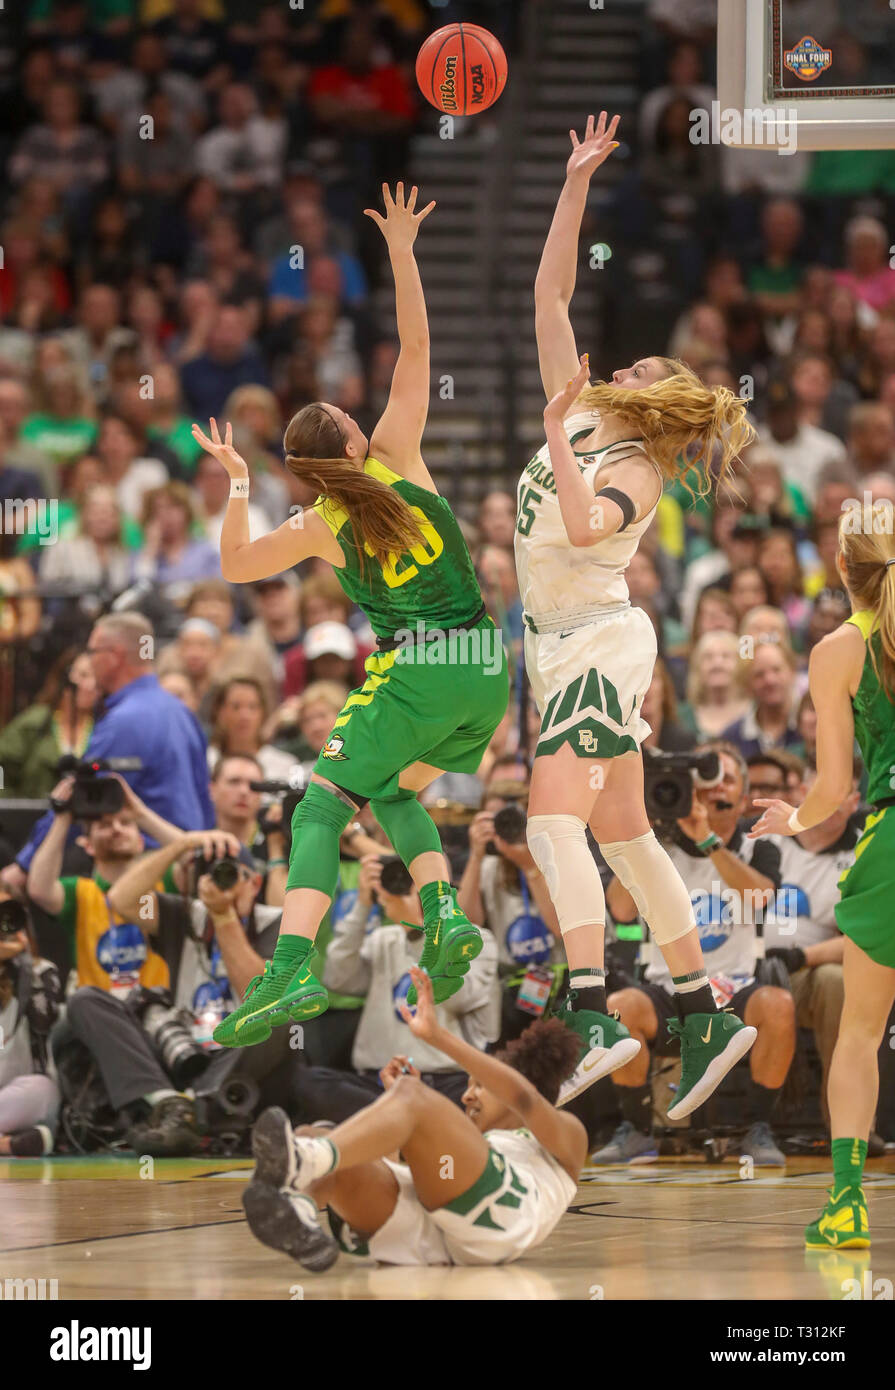 Tampa, Florida, USA. 5th Apr, 2019. DIRK SHADD | Times.Oregon Ducks guard Sabrina Ionescu (20), left, battles for the control of the ball with Baylor Lady Bears forward Lauren Cox (15) during the first half of their NCAA Women's Final Four semi-final game Friday, April 5, 2019 in Tampa. Credit: Dirk Shadd/Tampa Bay Times/ZUMA Wire/Alamy Live News Stock Photo